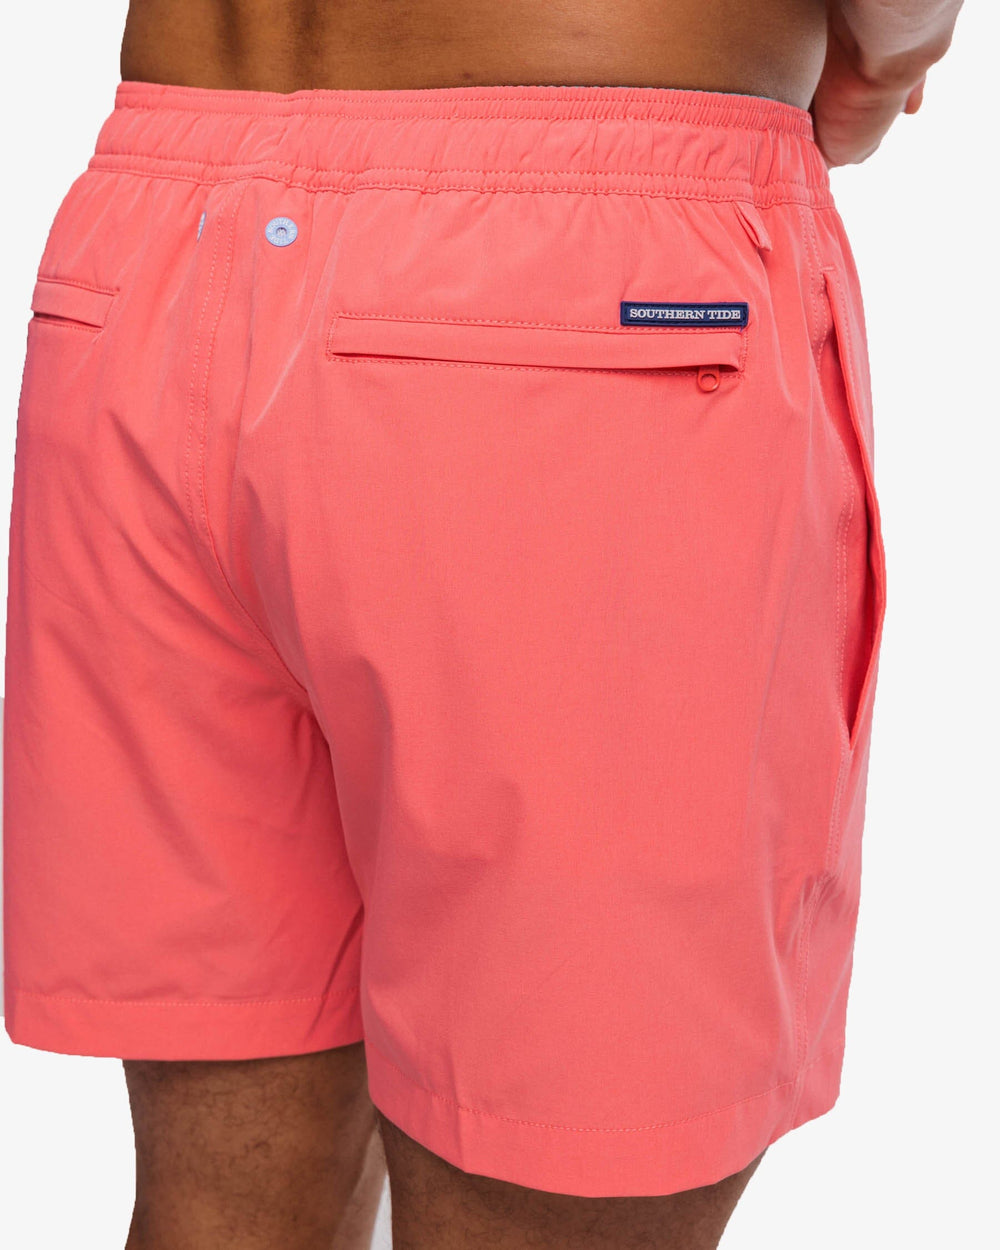 The detail view of the Southern Tide Solid Swim Trunk 3 by Southern Tide - Sunkist Coral